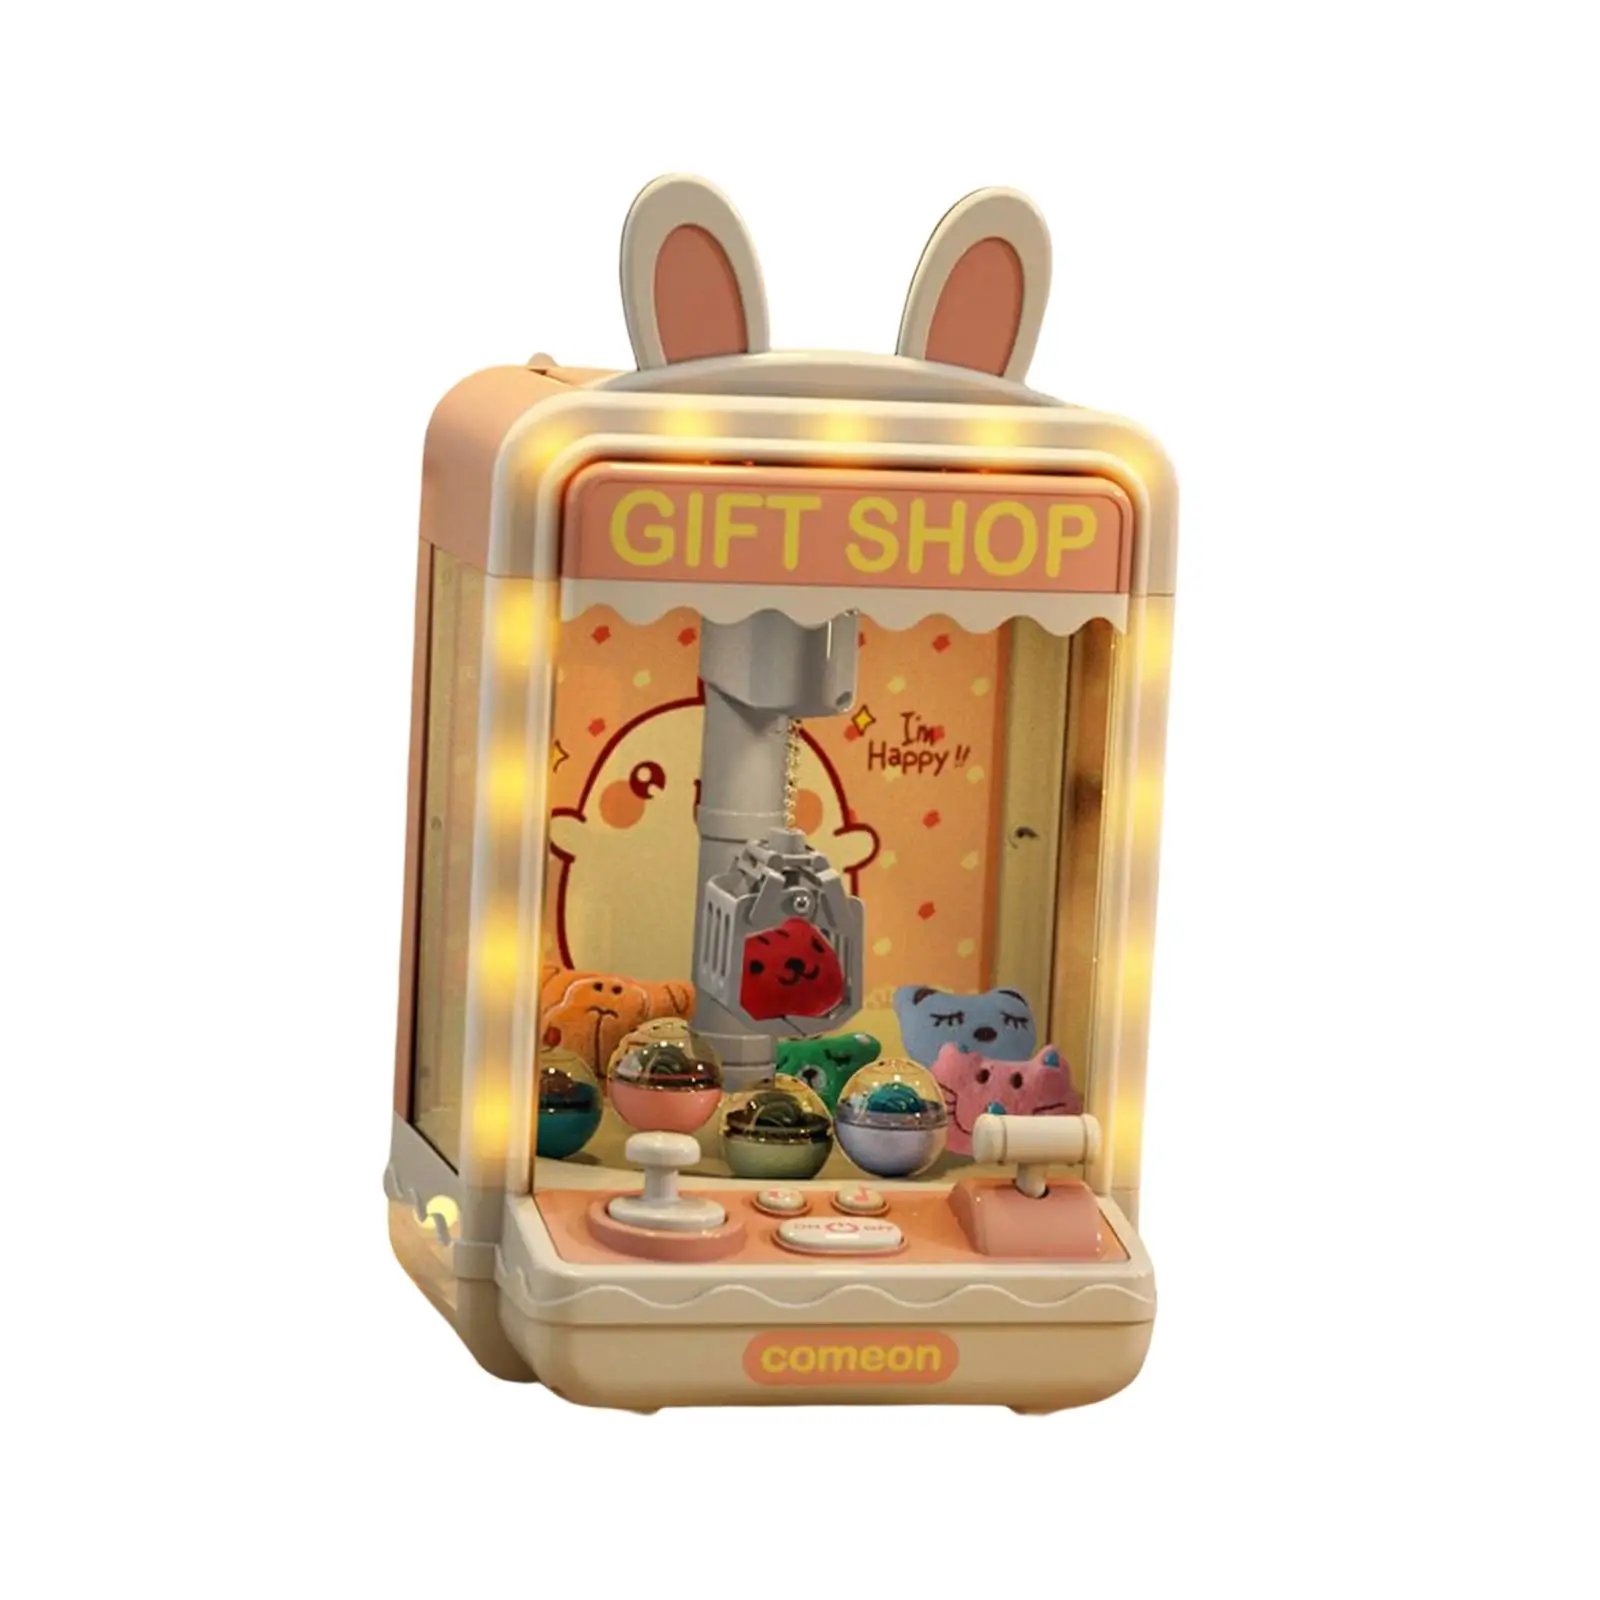 Automatic Doll Claw Machine Portable Stable Mini Vending Machine Game Prizes Toy Easy to Use Play Game for Living Room Children